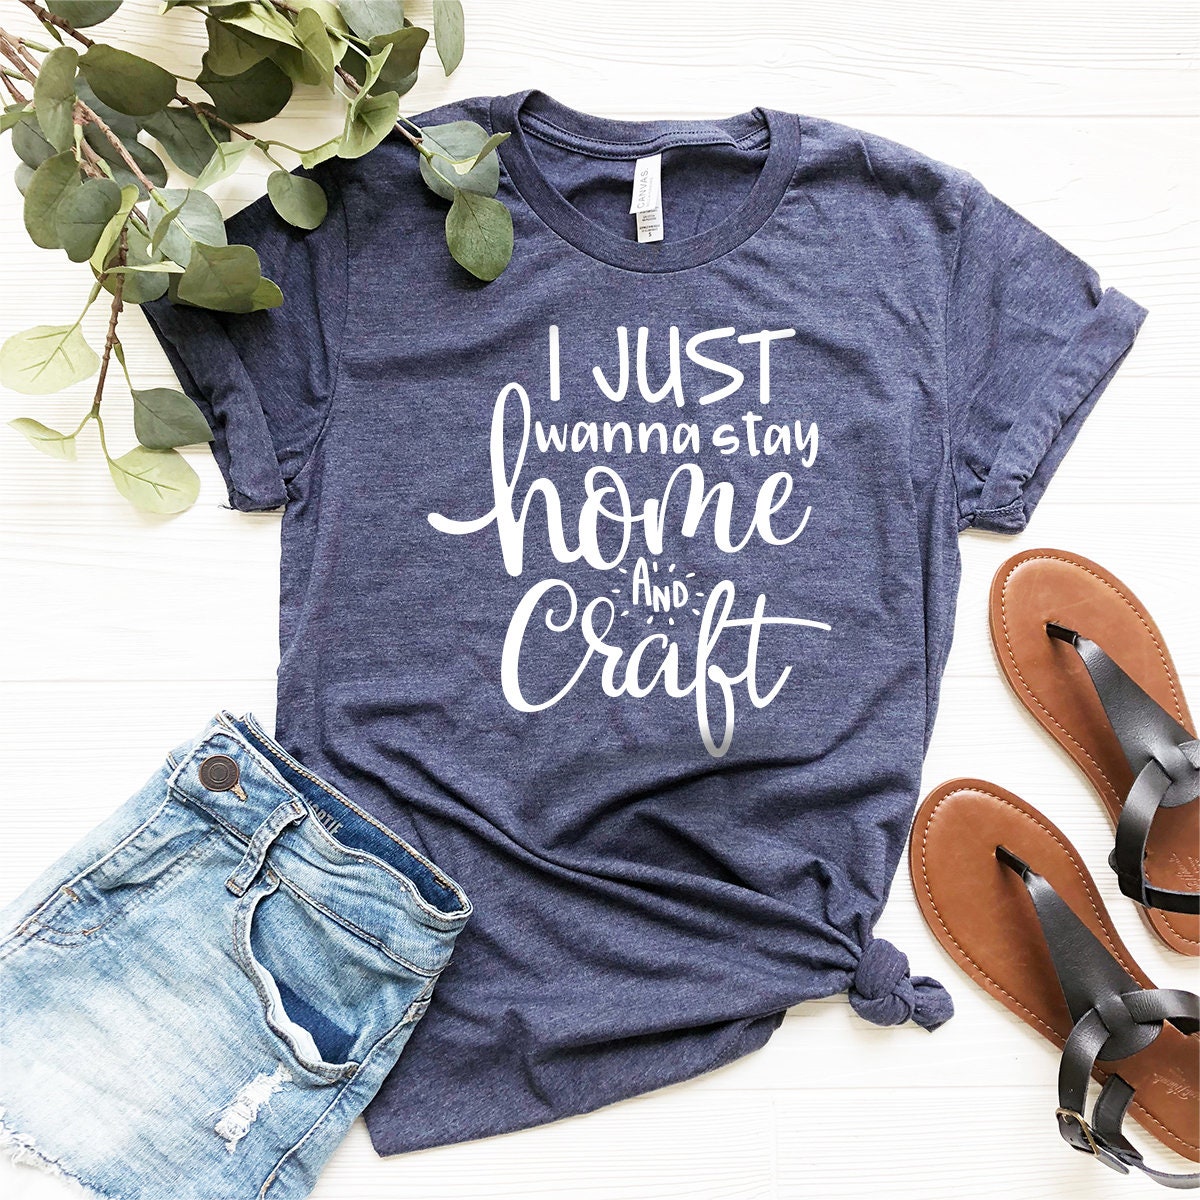 Crafting T-Shirt, Funny Craft Hobby Shirt, Gift For Crafter, Crafter Shirt, Crafter Gift, I Just Wanna Stay Home And Craft Tee - Fastdeliverytees.com